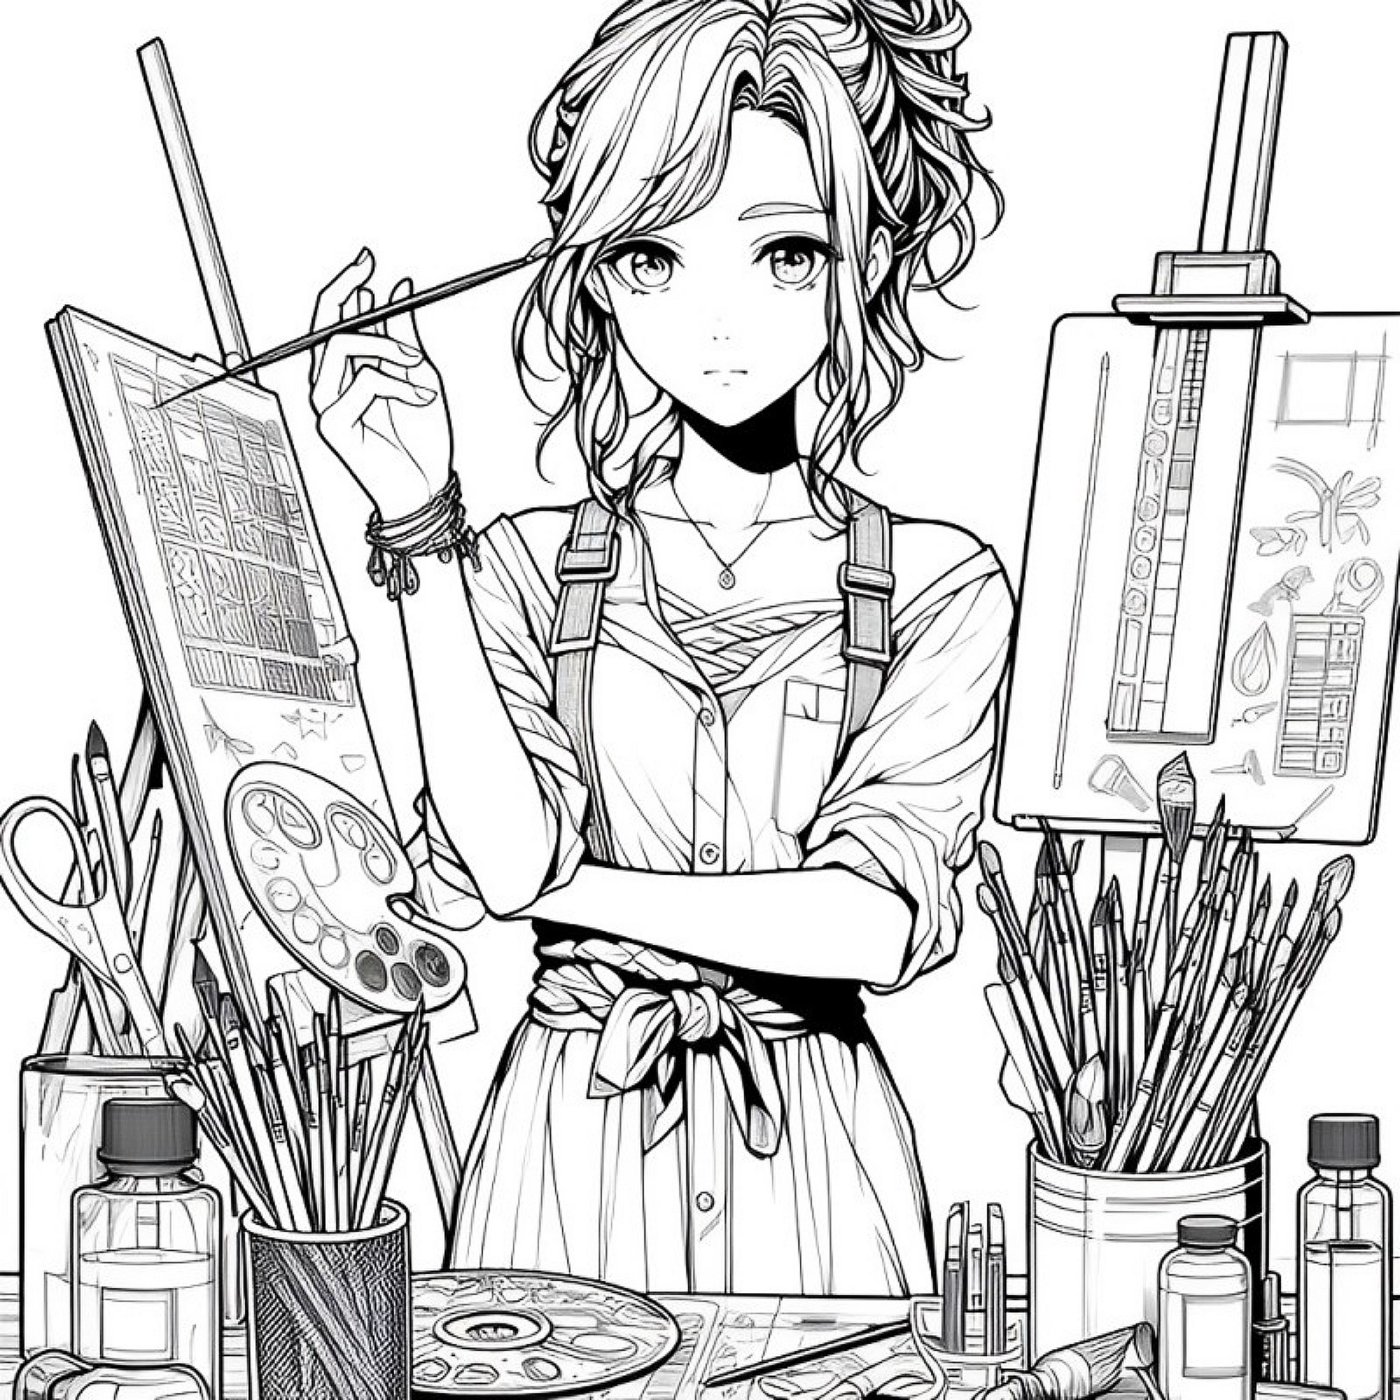 Anime Artistry Collection: 20 Exquisite Digital Coloring Pages - Instant Download PDF and JPG - Manga Girls, Anime Illustrations, Best Seller, Unique Creations, New Releases, Top-Rated Digital Book for Creative Enthusiasts preview image.